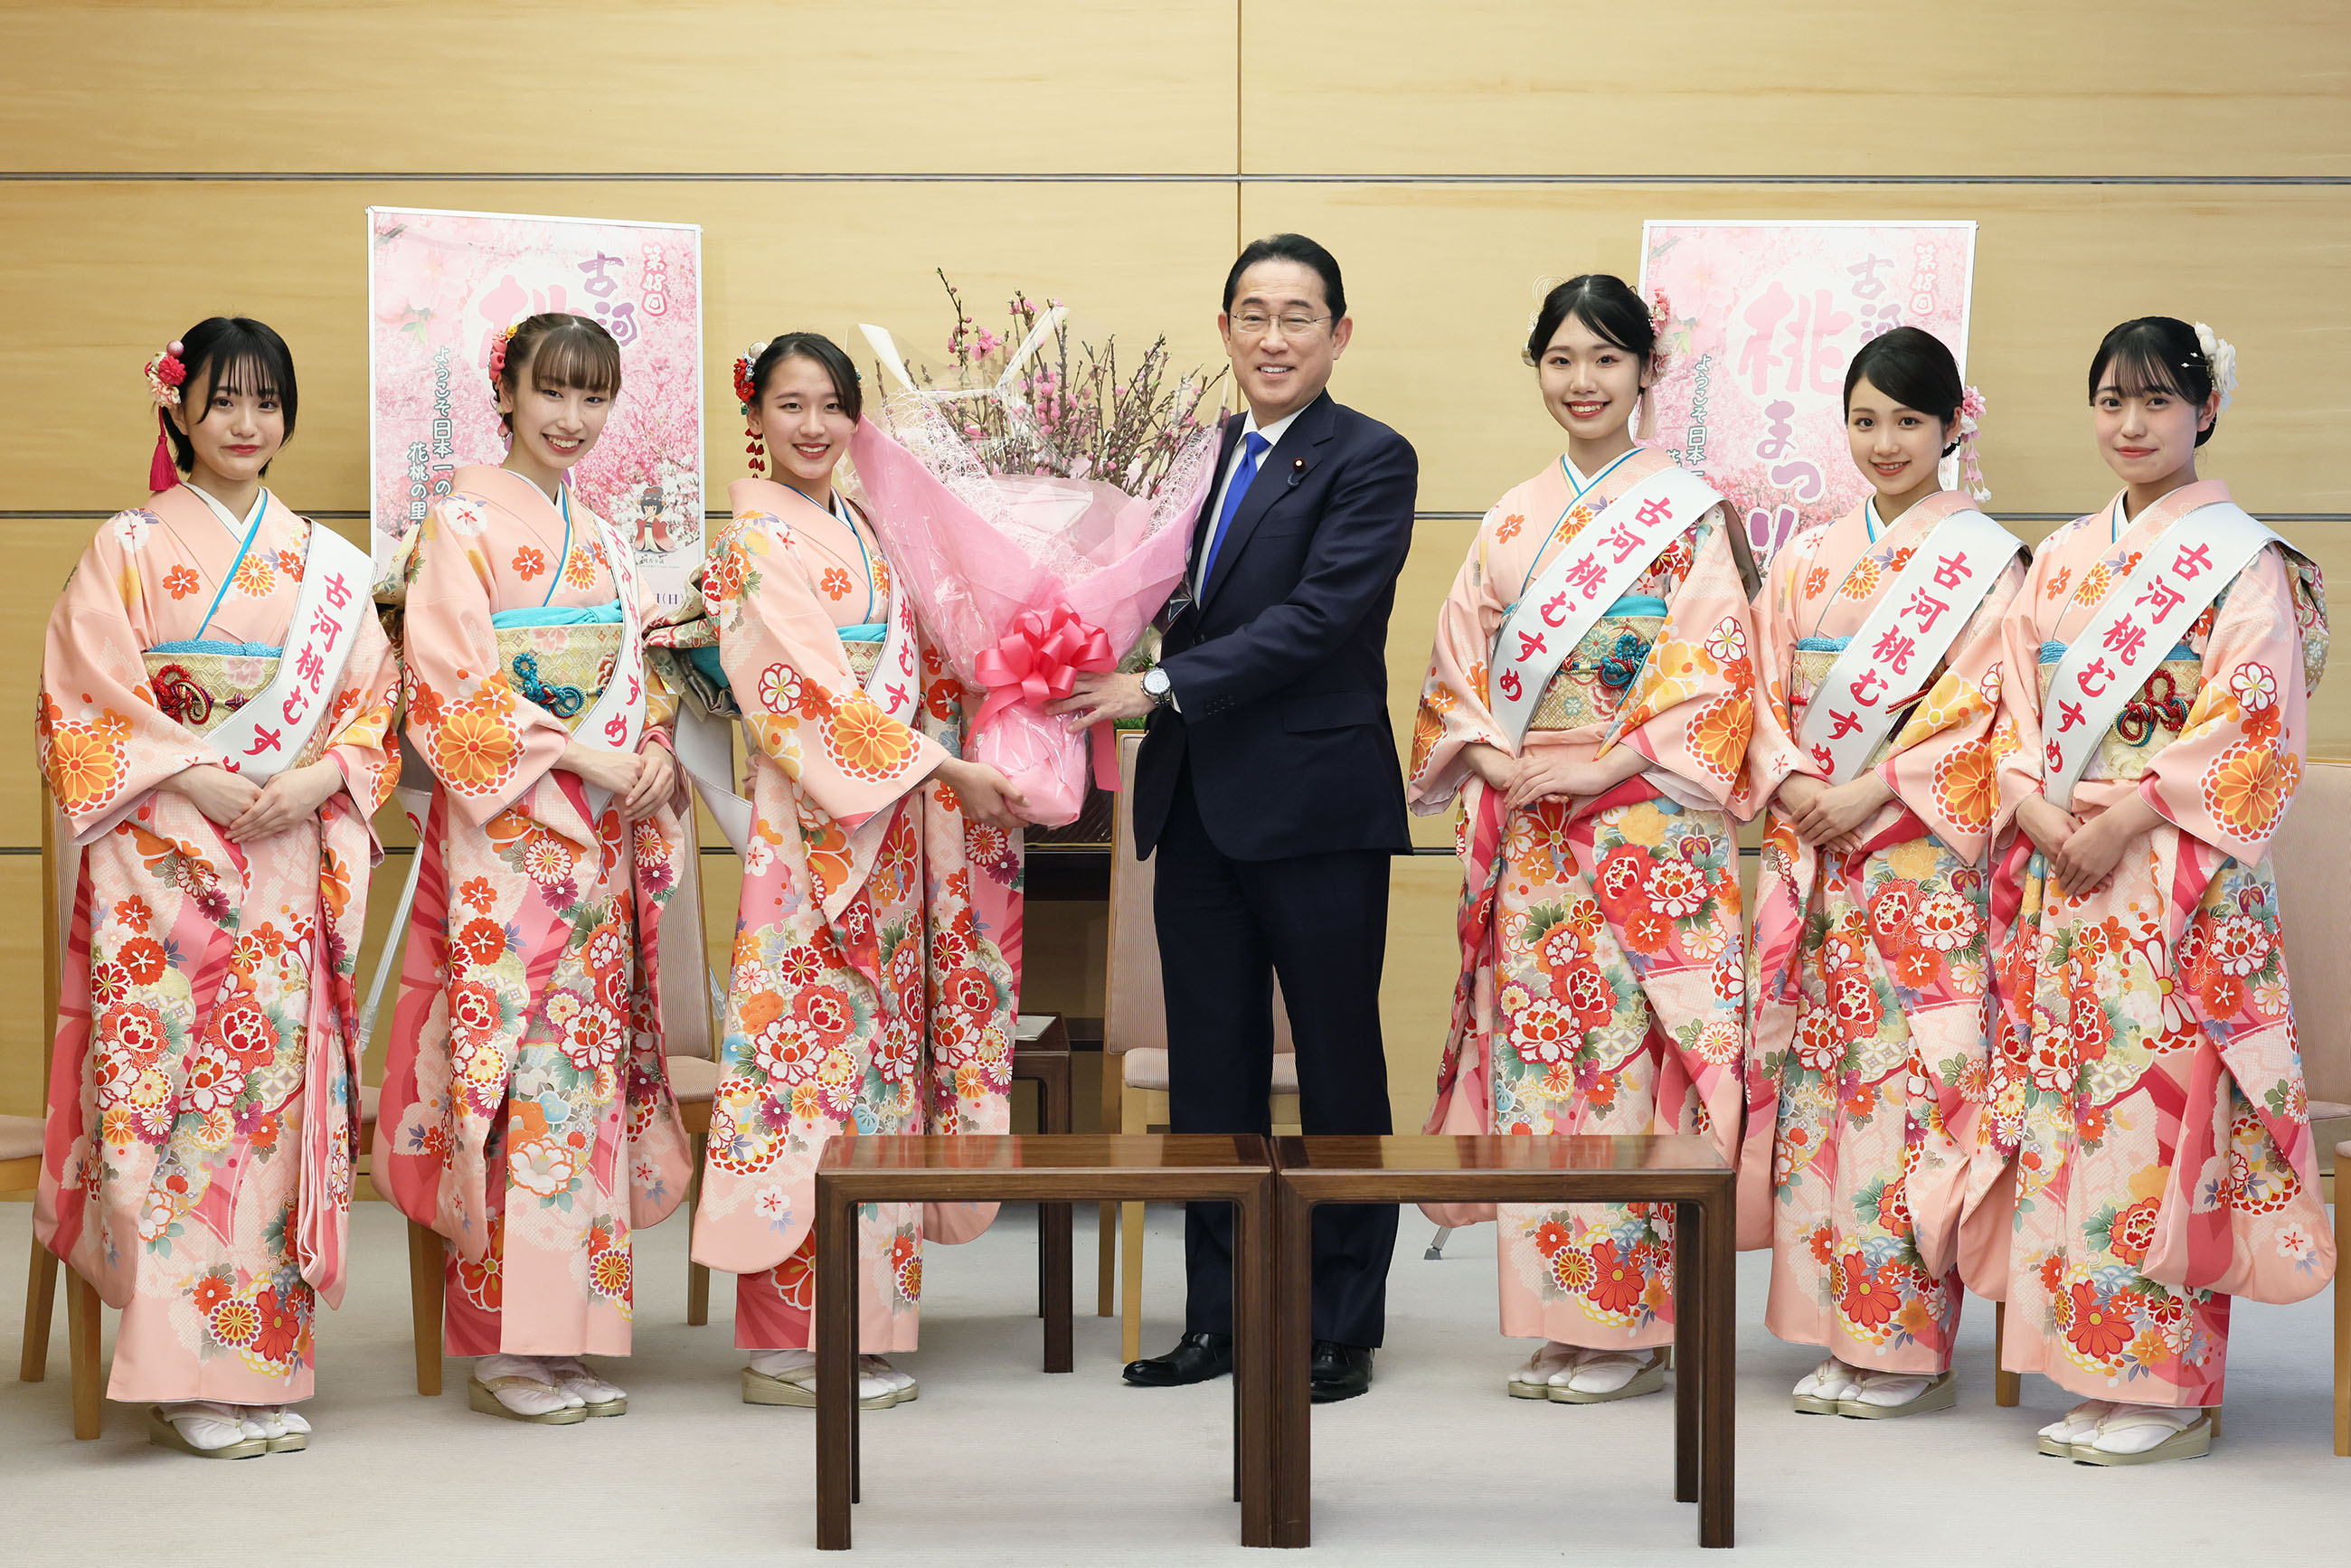 Courtesy Call from Koga Momo-Musume and Others